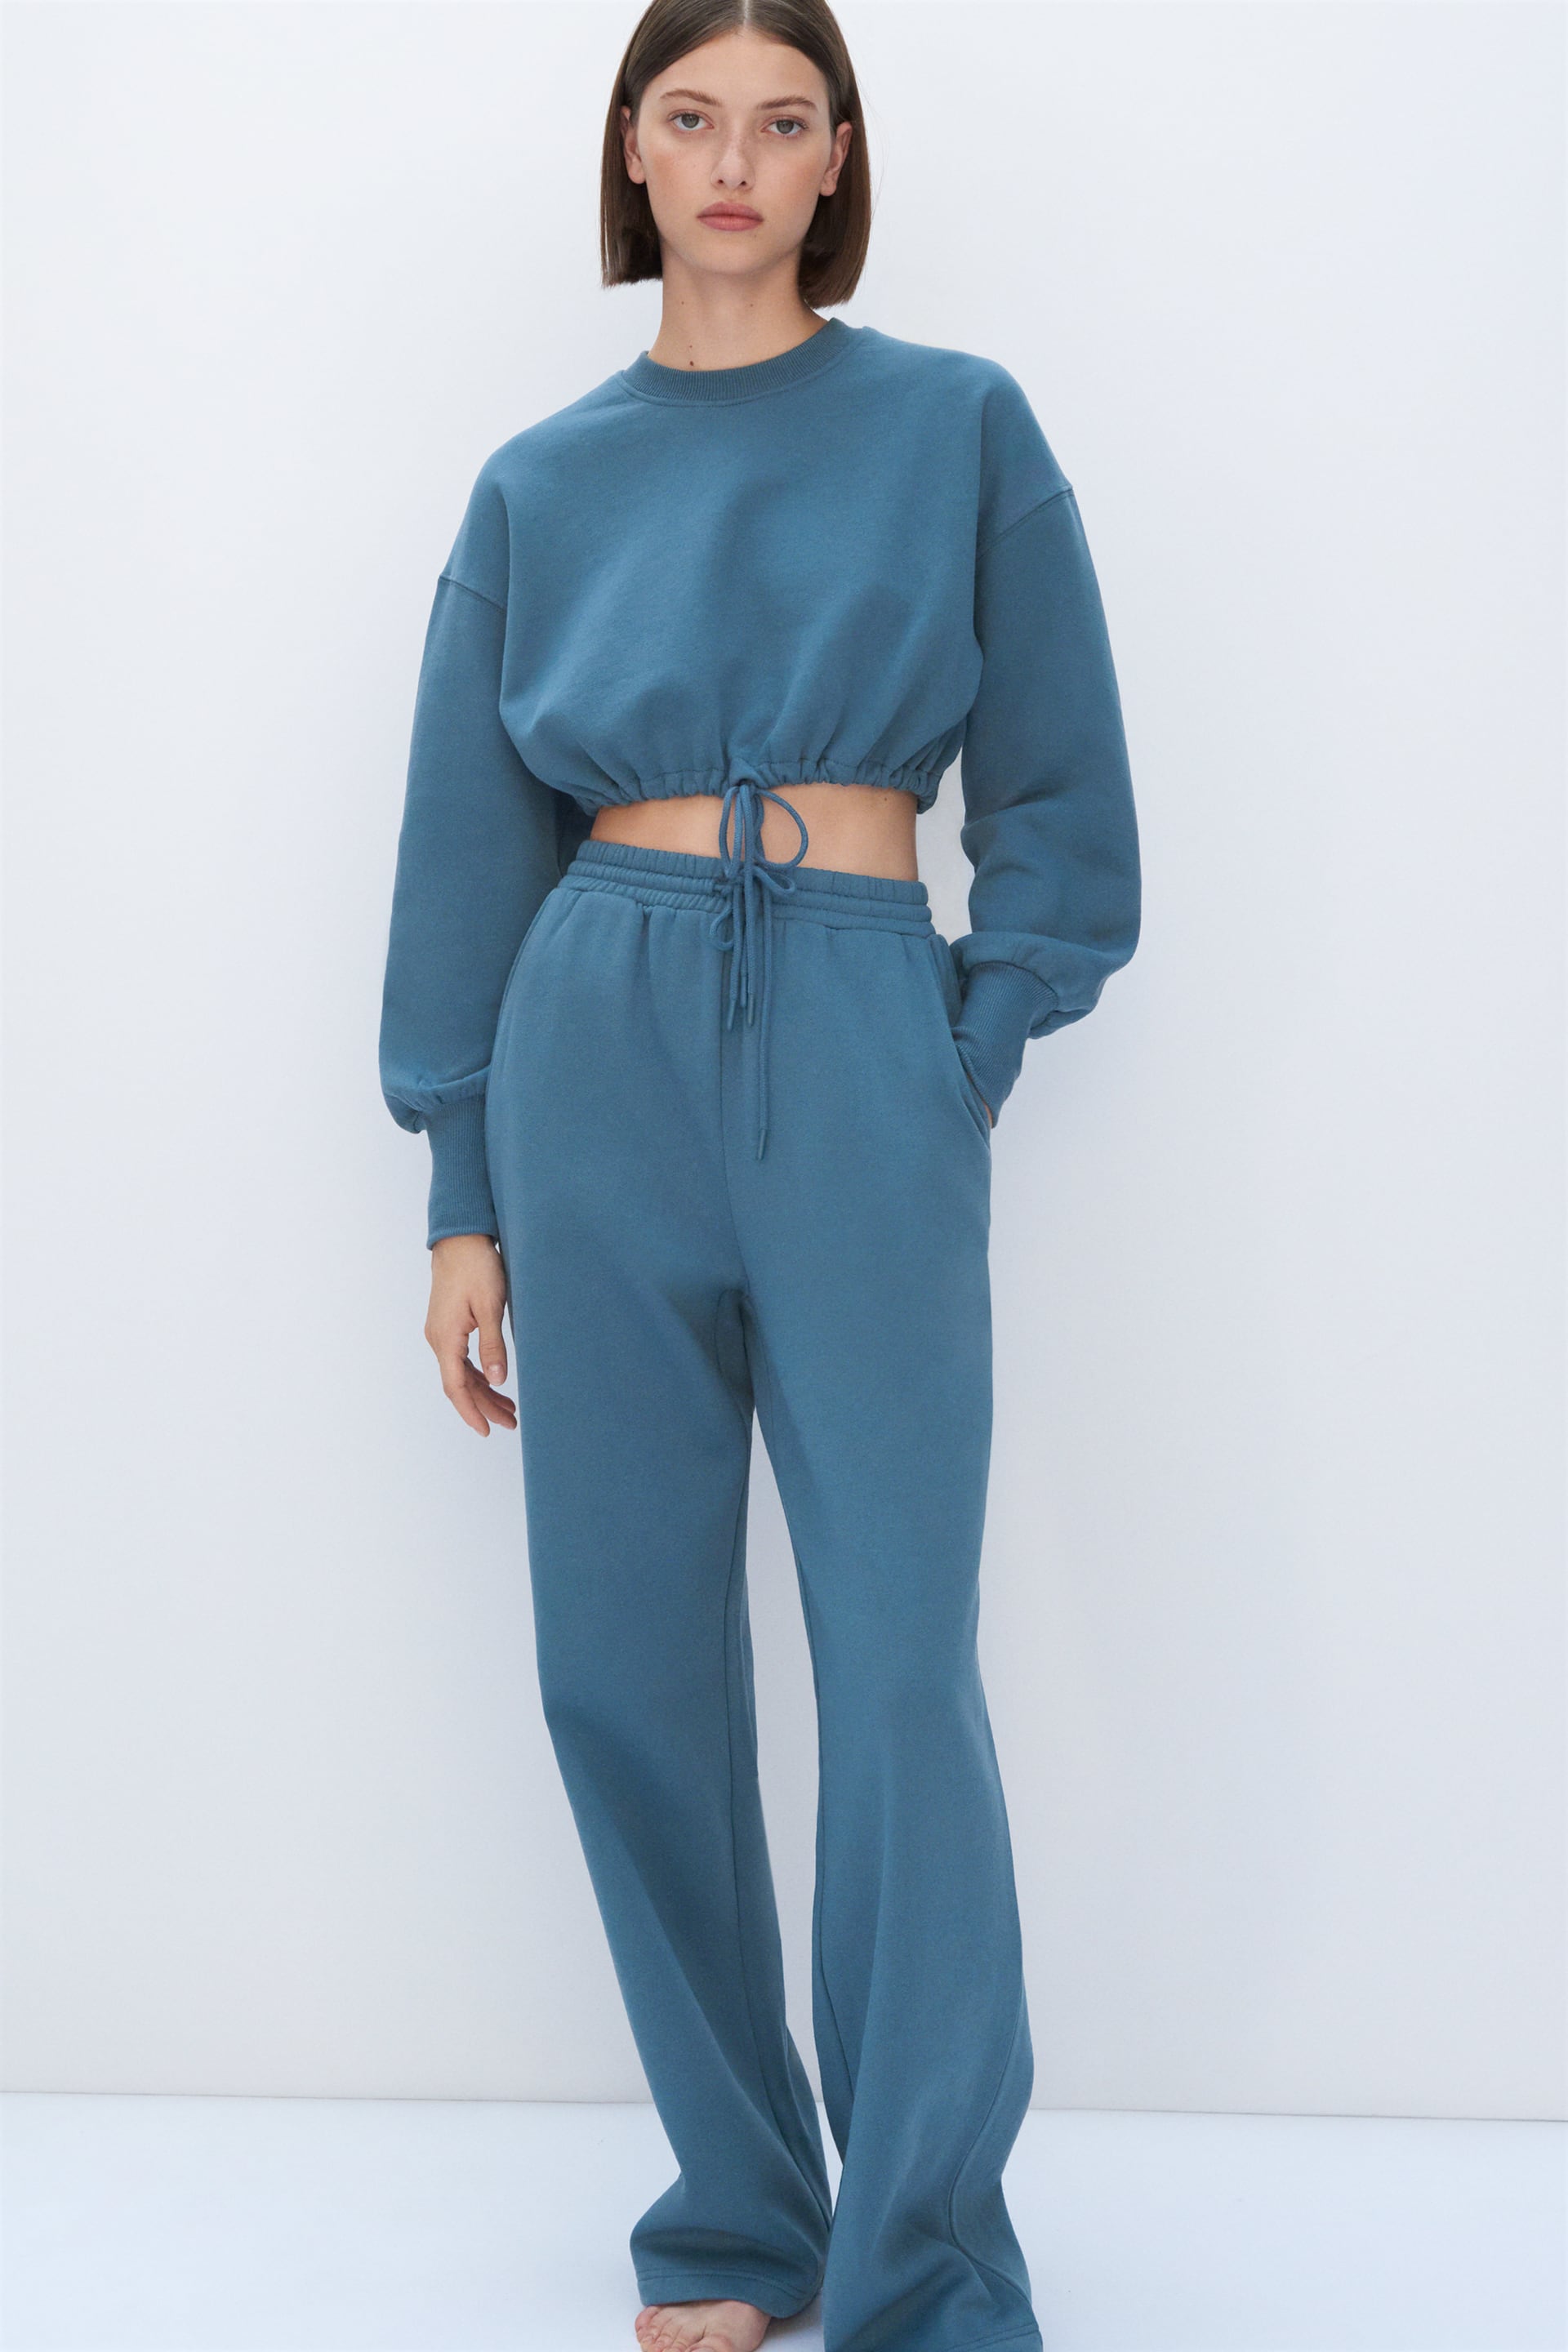 The 28 Best Loungewear Pieces at Zara That Are So Chic | Who What Wear UK